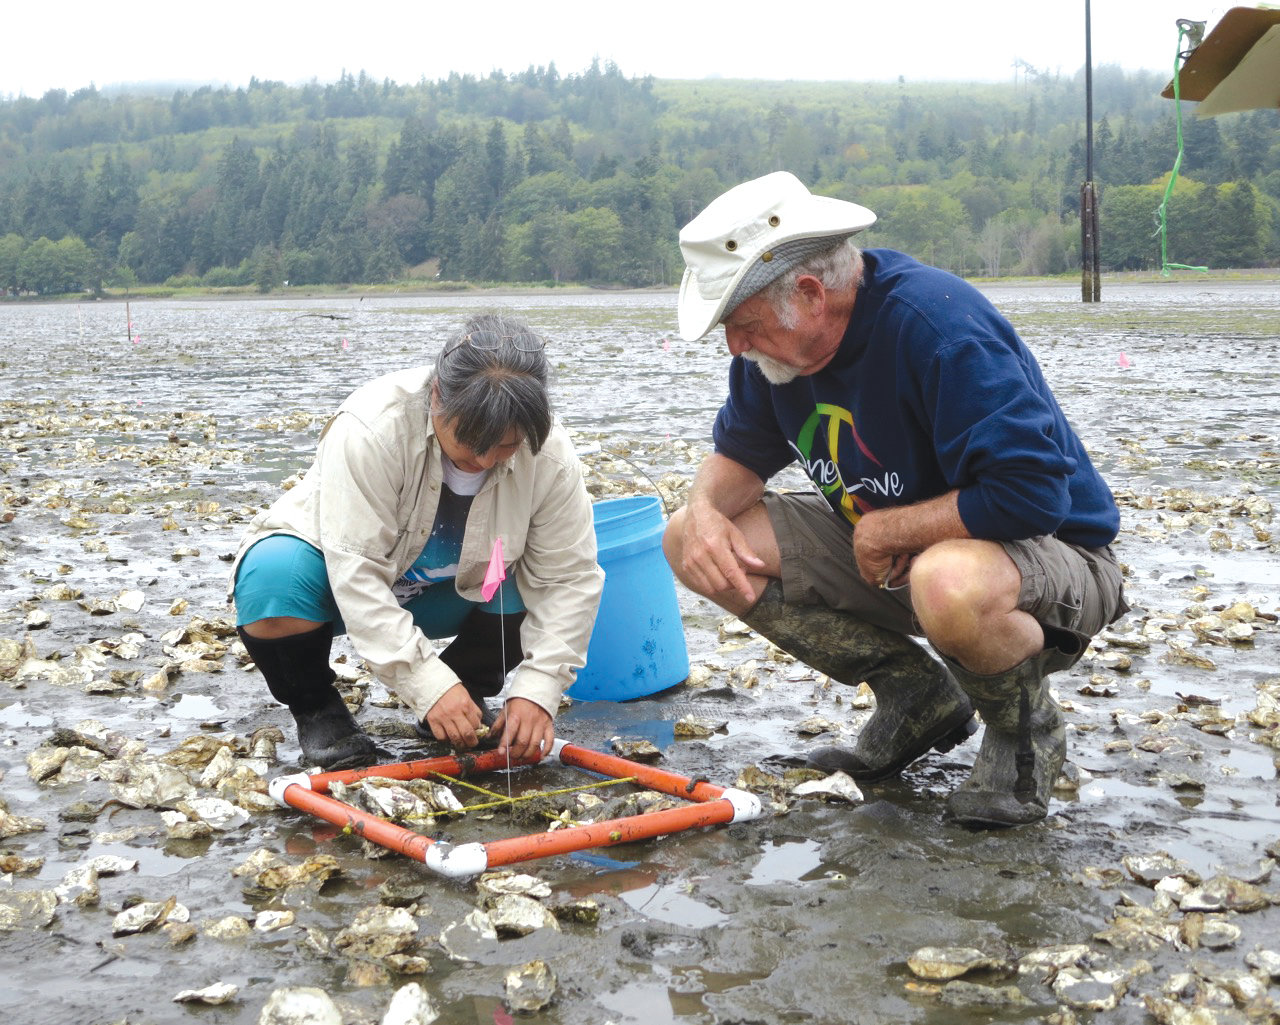 Community volunteer Laura Inouye and beach naturalist student Peter Ely are collecting data on an Olympia oyster restoration site with the Jefferson Marine Resources Committee.